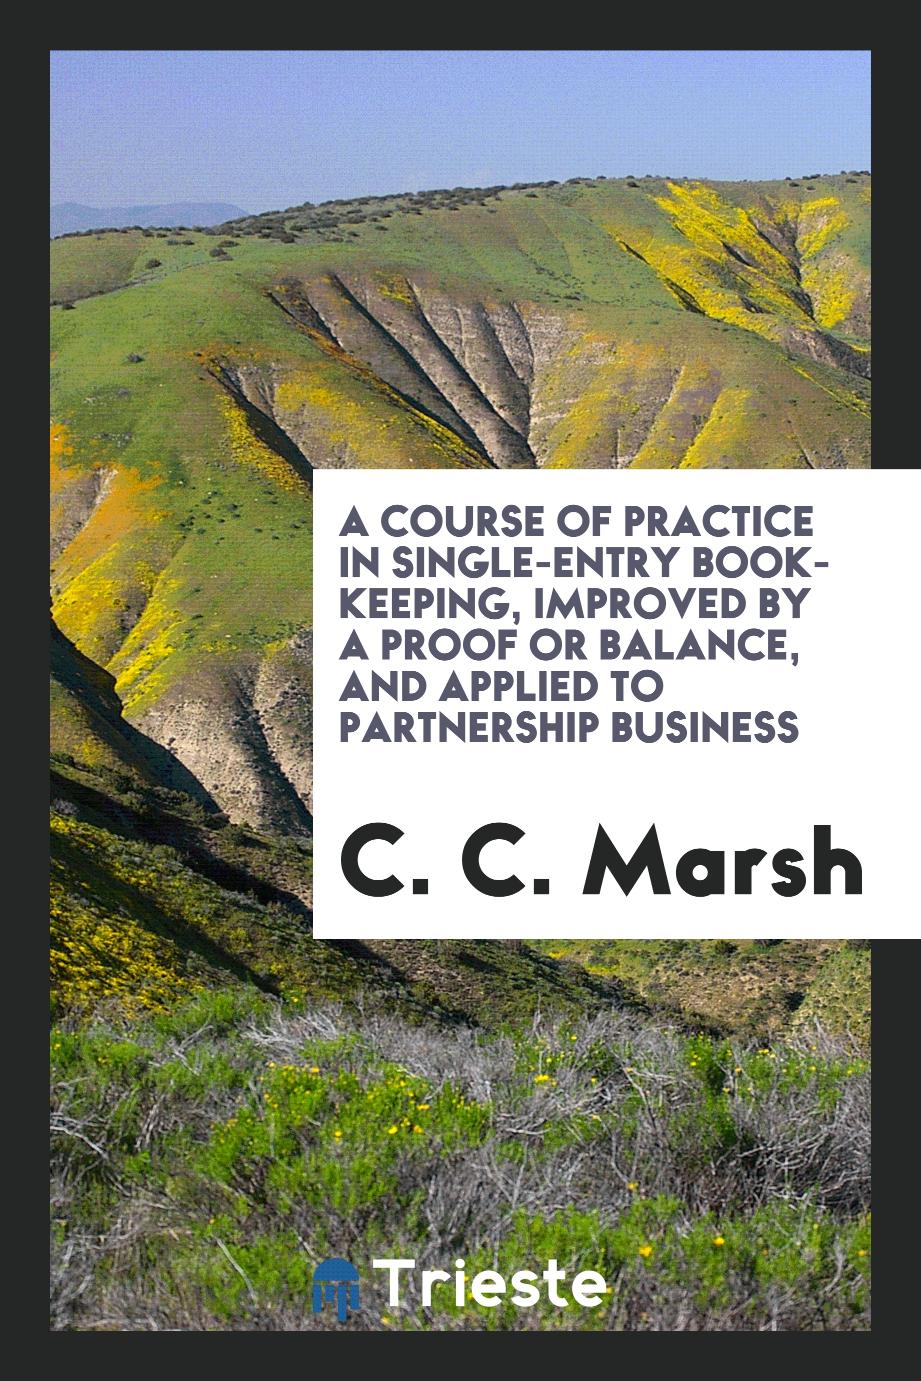 A Course of Practice in Single-Entry Book-Keeping, Improved by a Proof or Balance, and Applied to Partnership Business